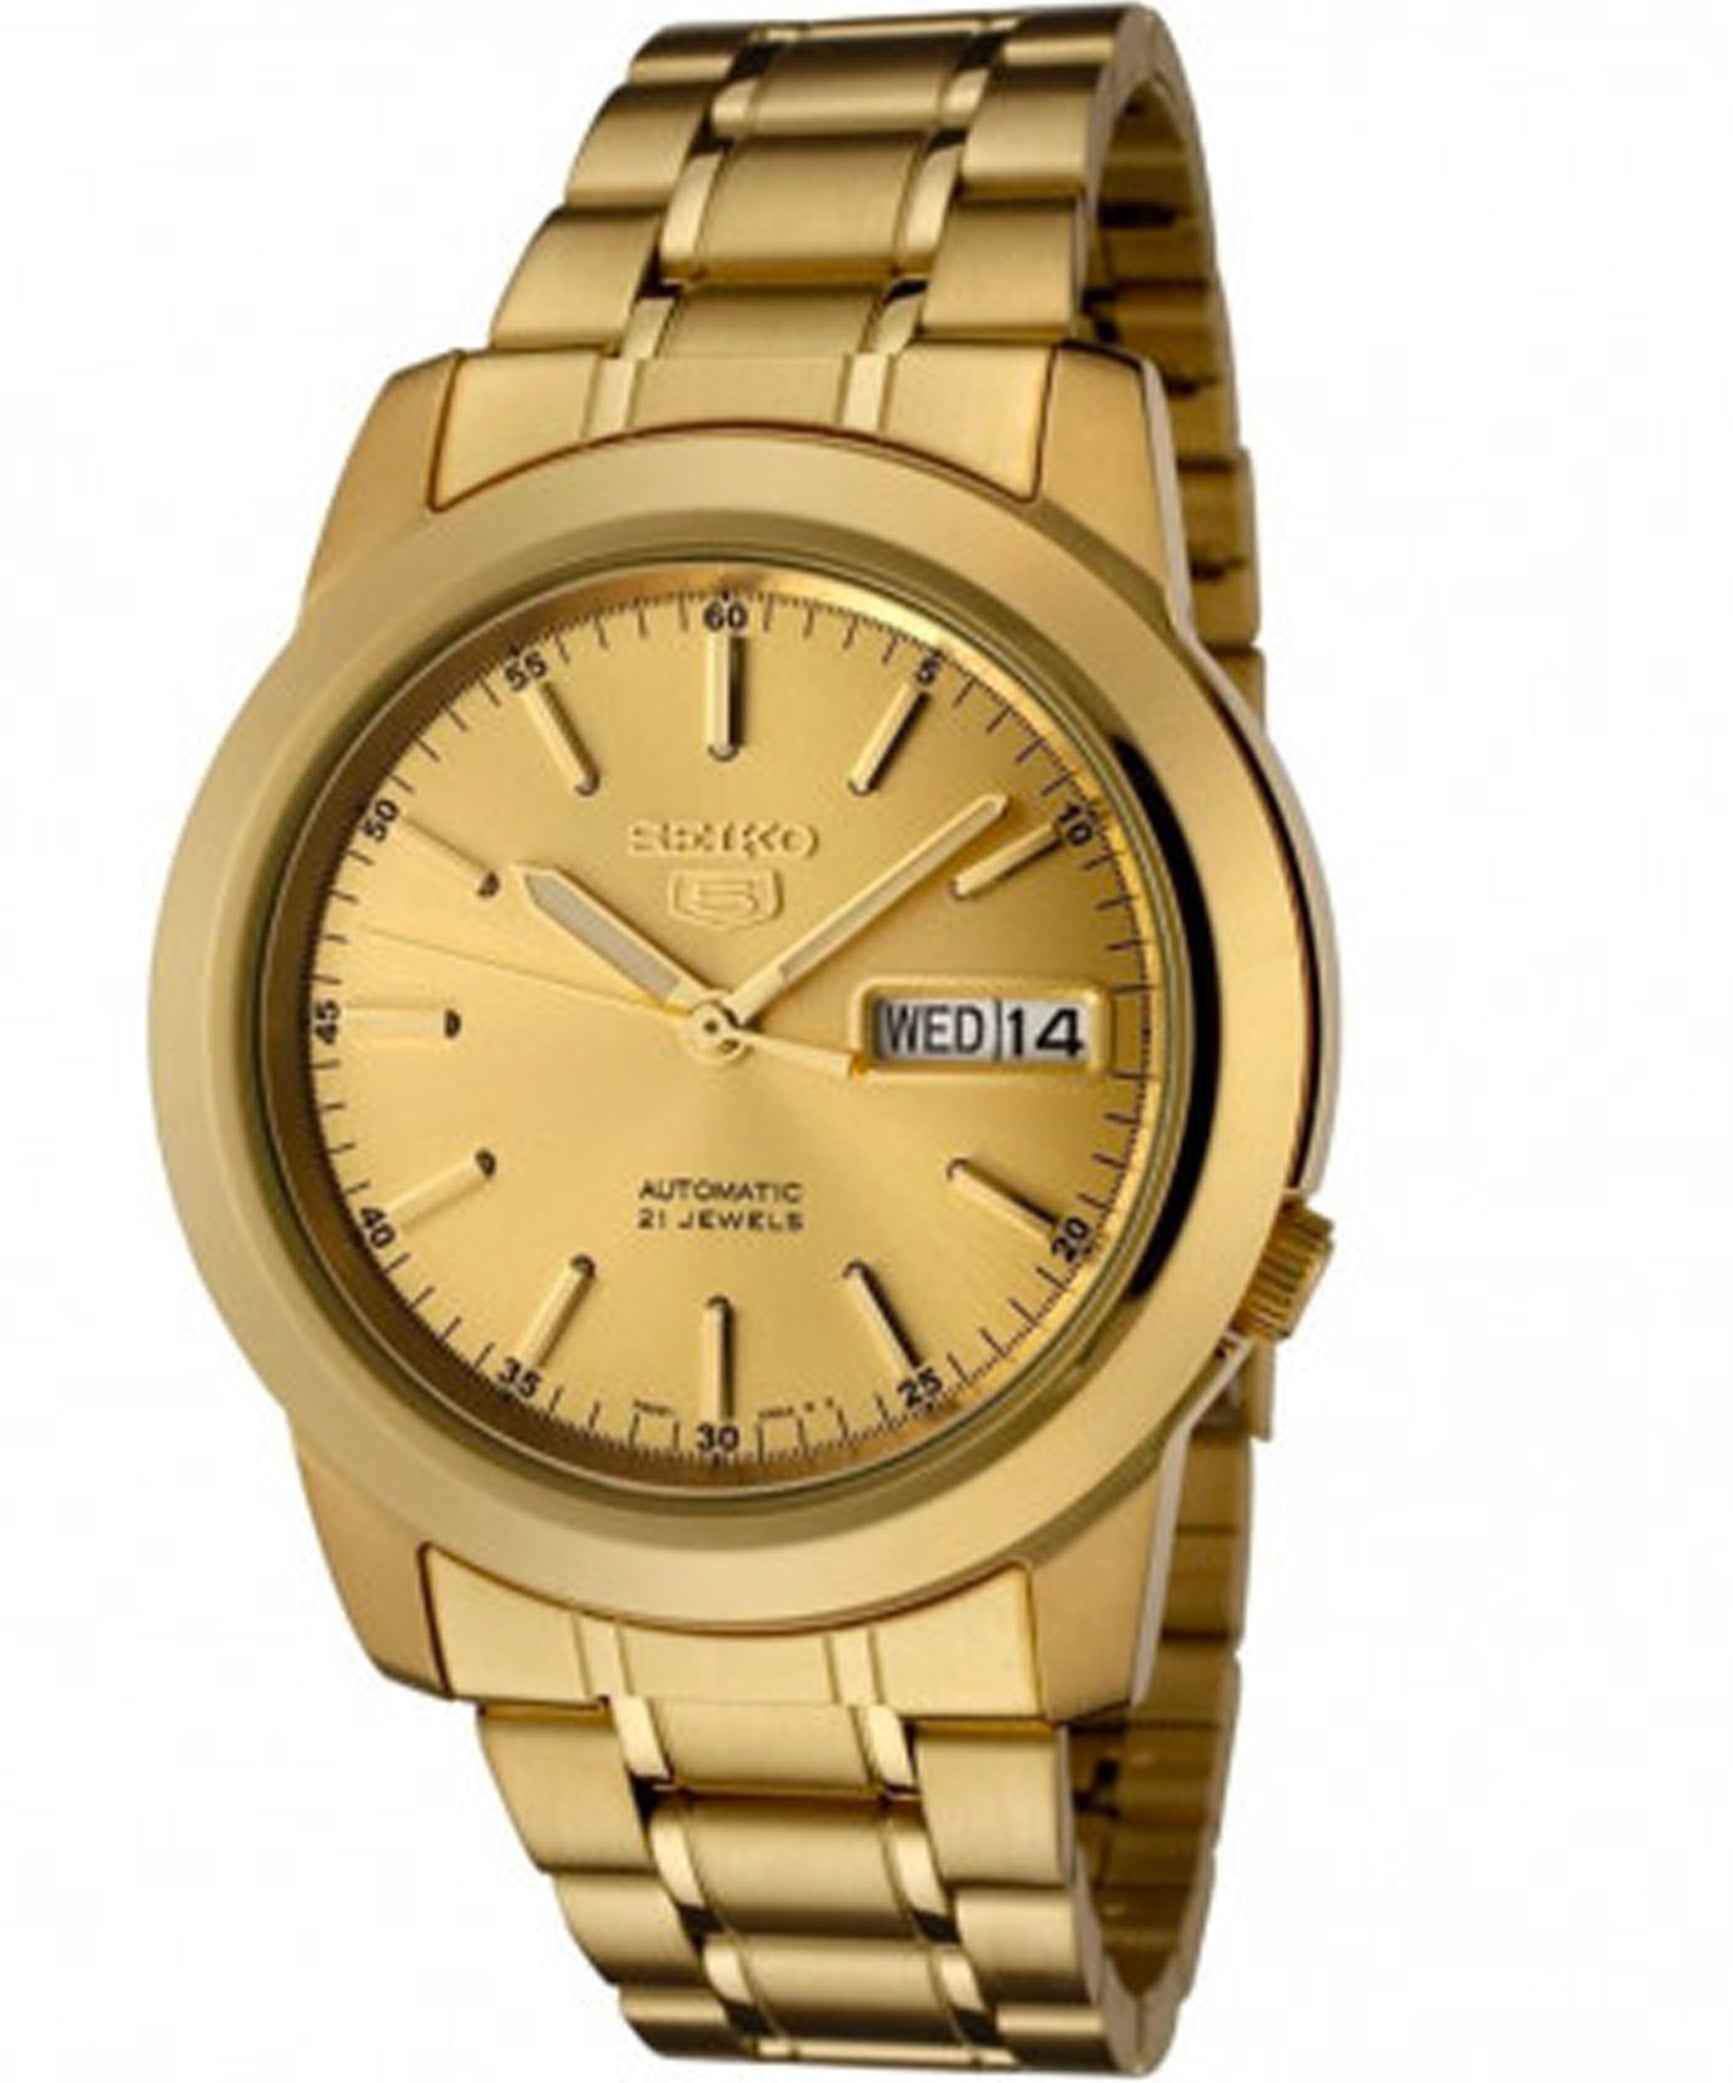 Seiko Men's Mechanical Watch Analog, Gold Dial Gold Stainless Band, SNKE56J